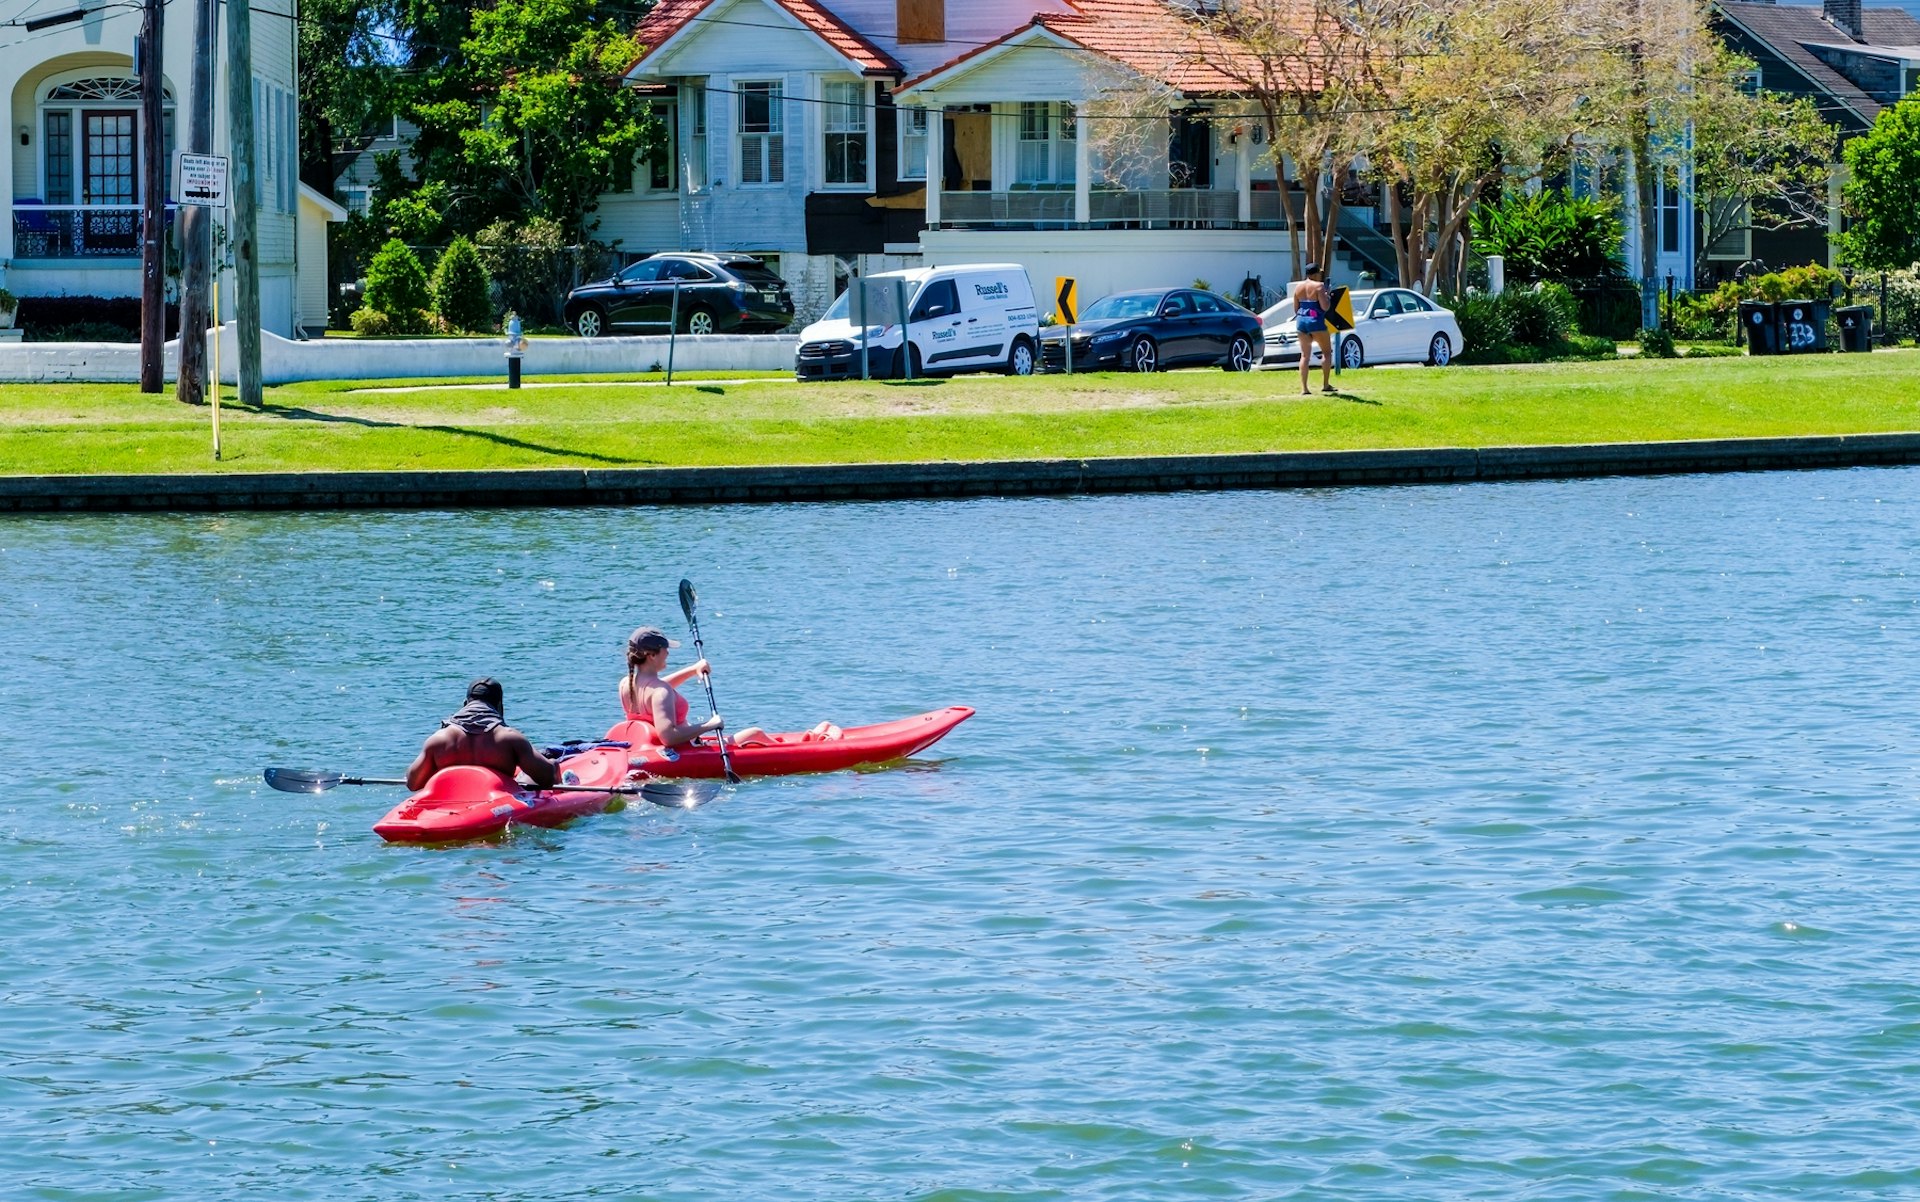 Two people in kayaks paddle down a neighborhood river